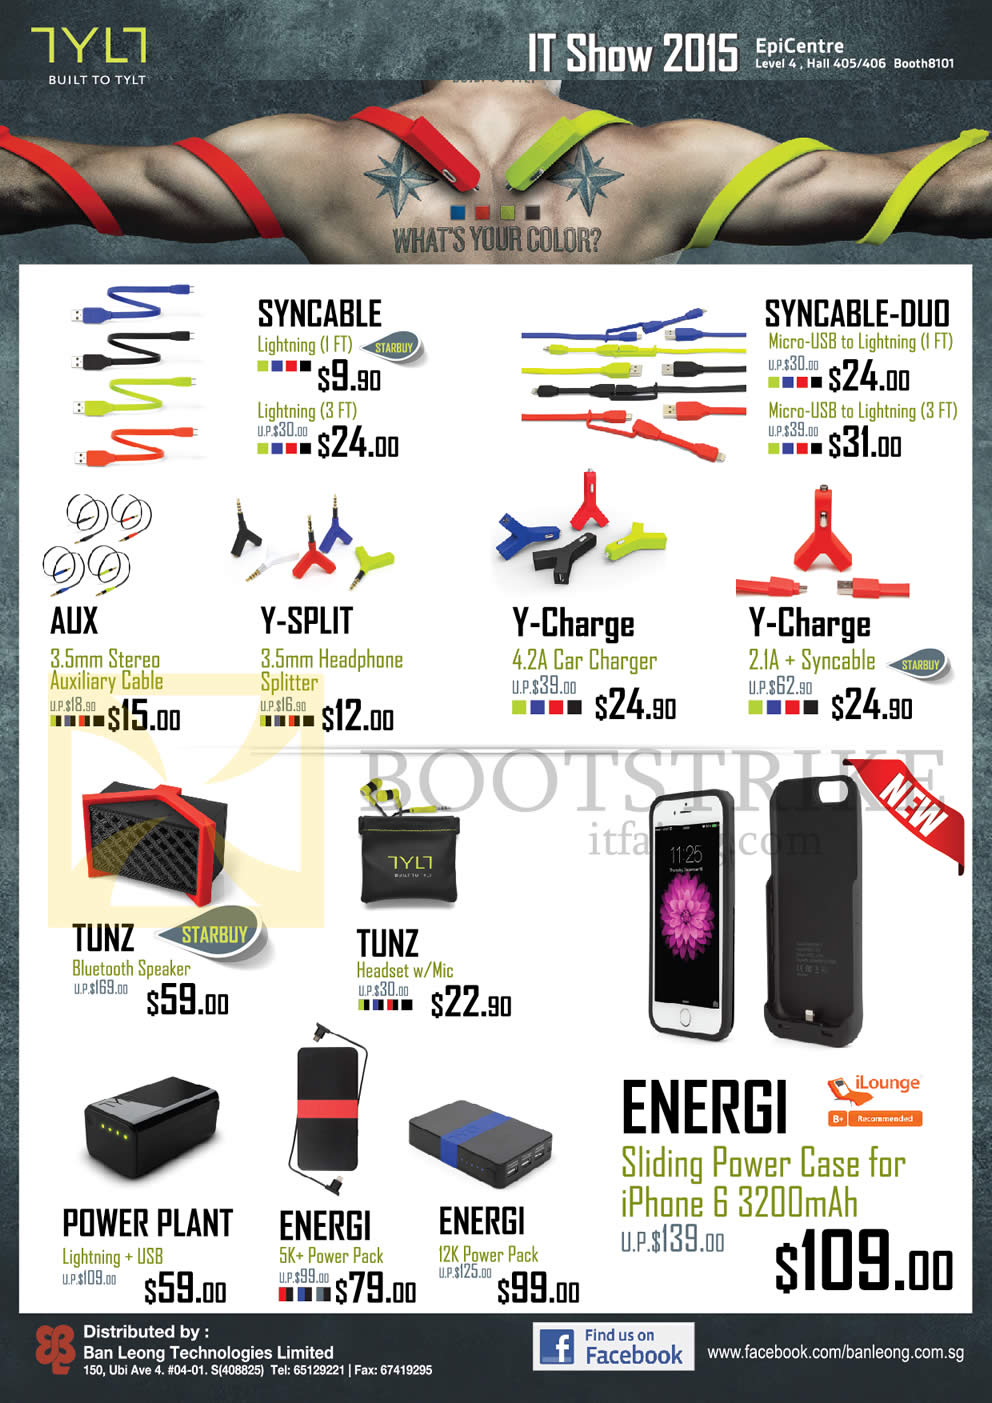 IT SHOW 2015 price list image brochure of Ban Leong TYLT Lightining Cables, Car Chargers, Bluetooth Speakers, Power Cases, Power Banks Syncable, Aux, Y-Split, Y-Charge, Tunz, Power Plant, Energi